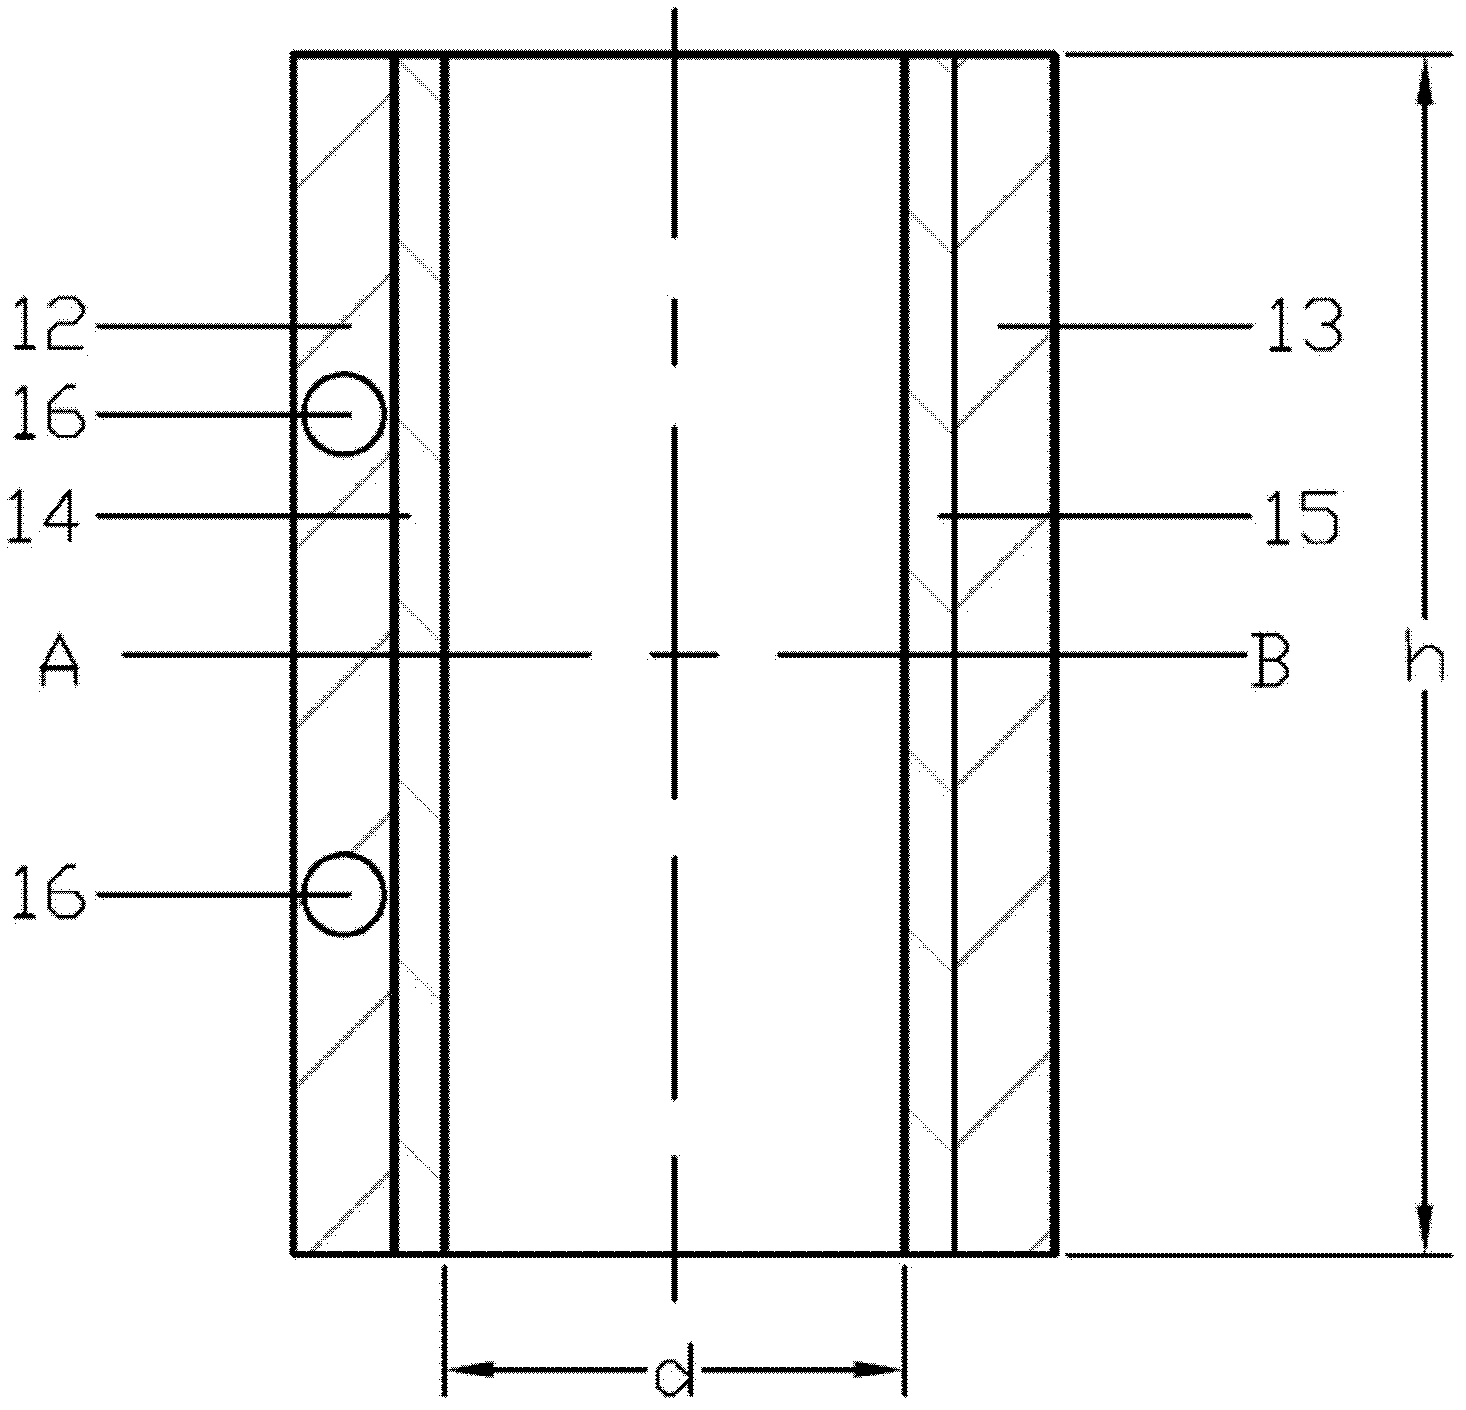 Plasma device with double-hollow cathode and double-hollow cathode and applications